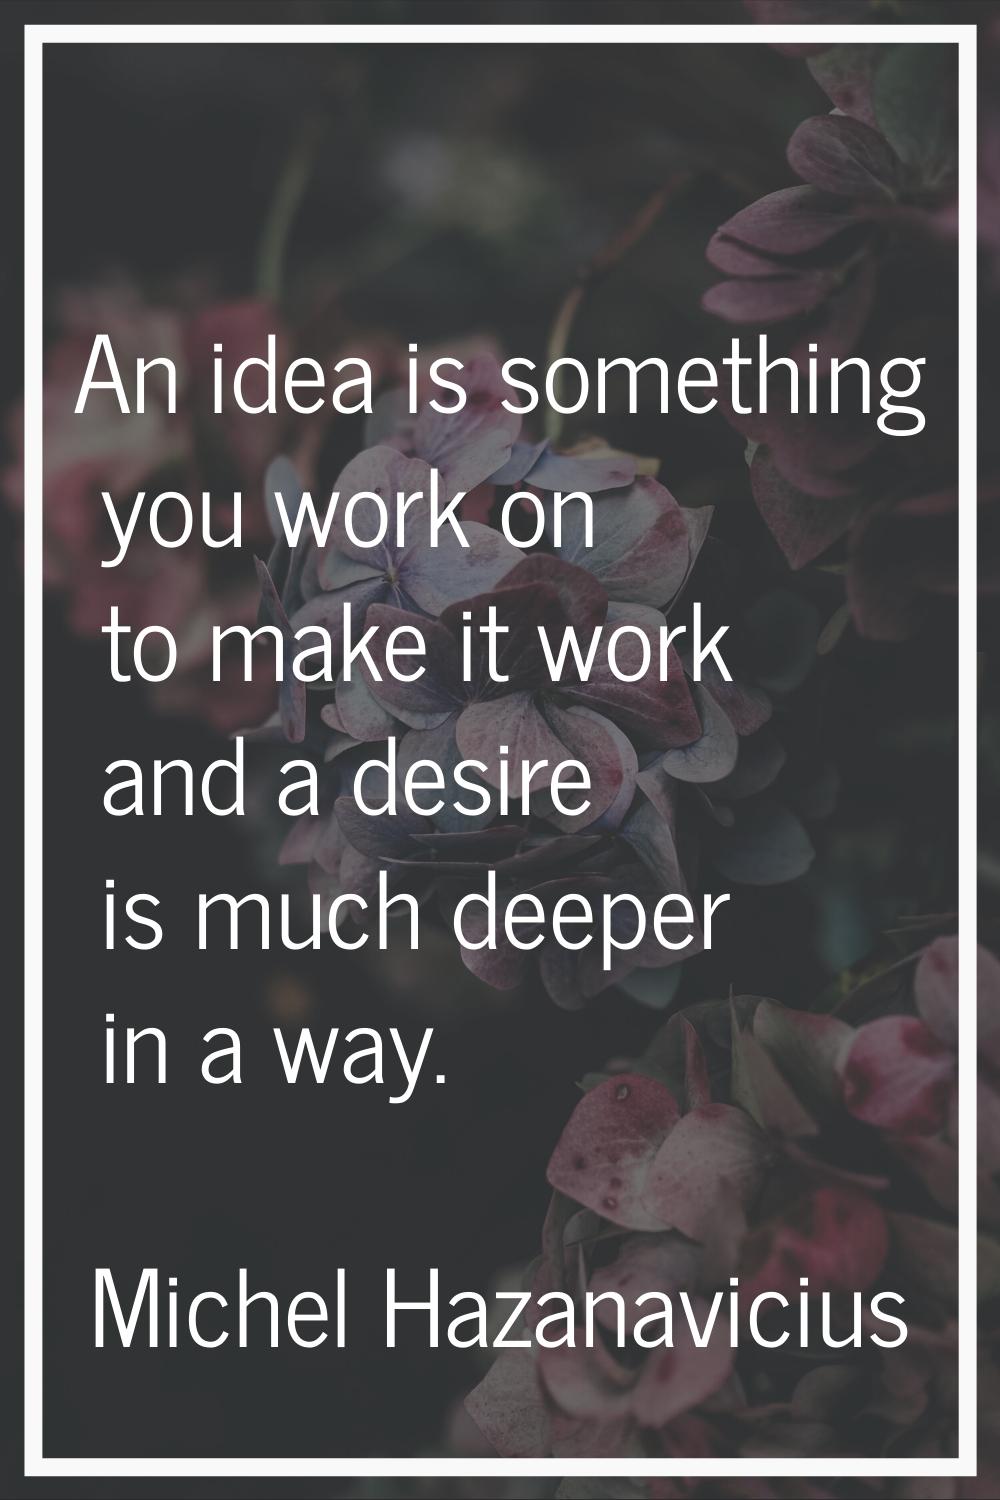 An idea is something you work on to make it work and a desire is much deeper in a way.